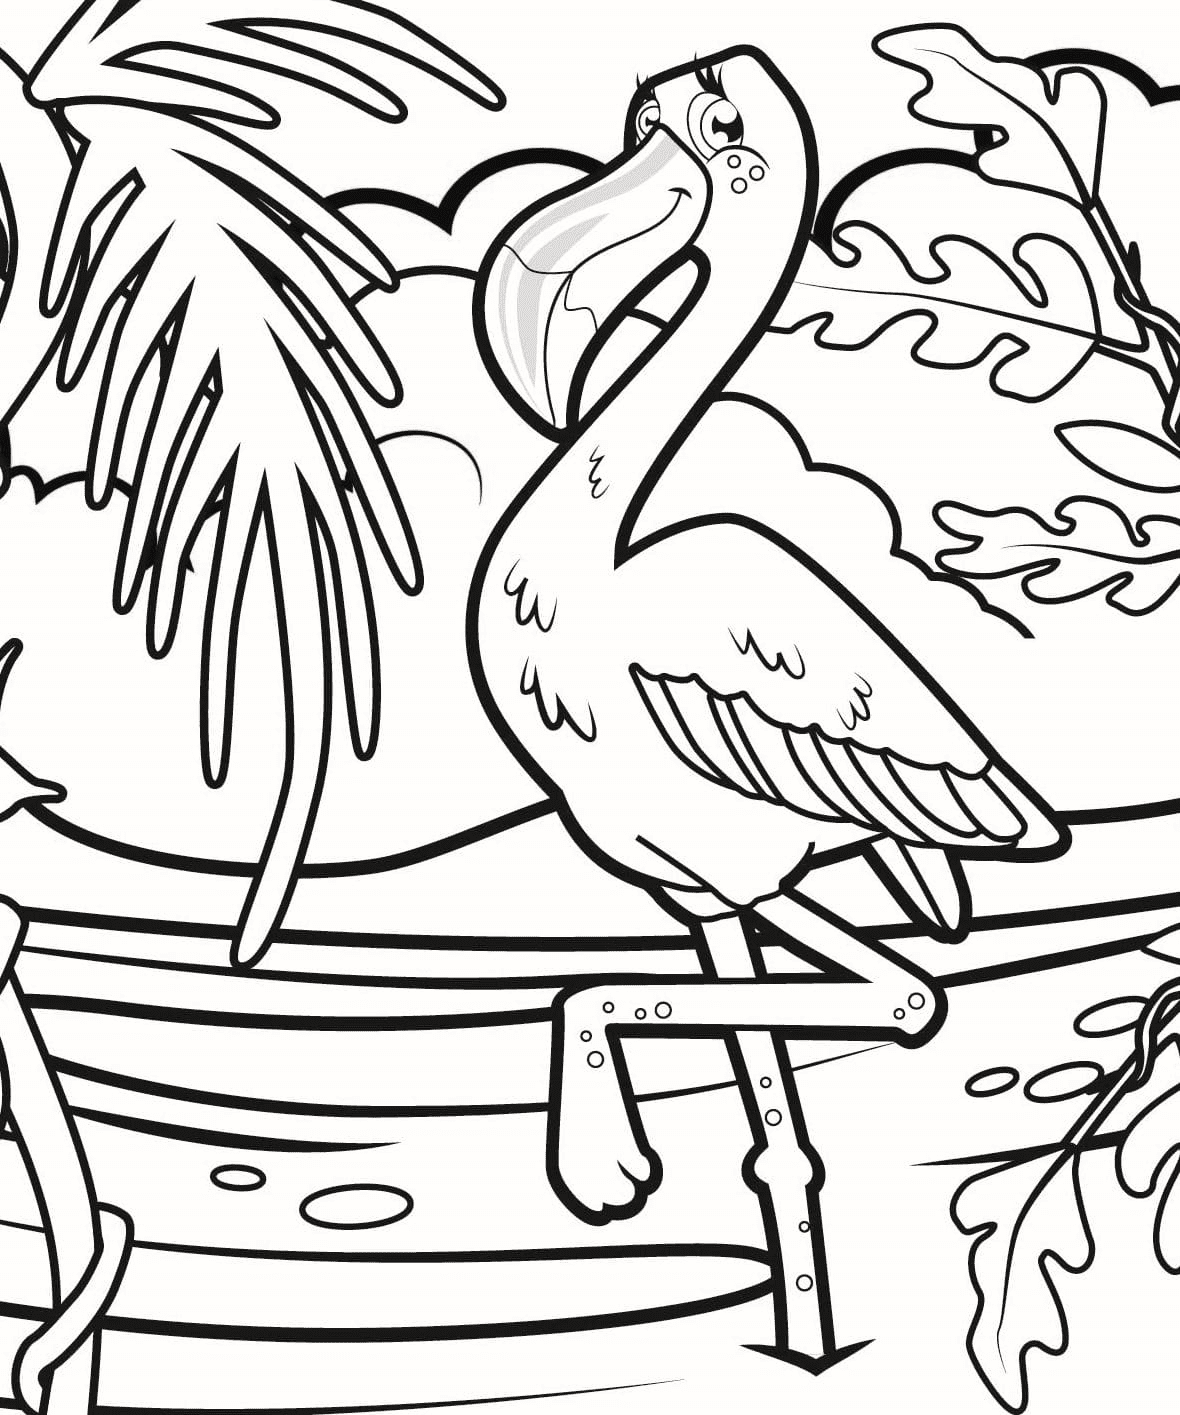 Flamingos in a Nature Reserve Coloring Page